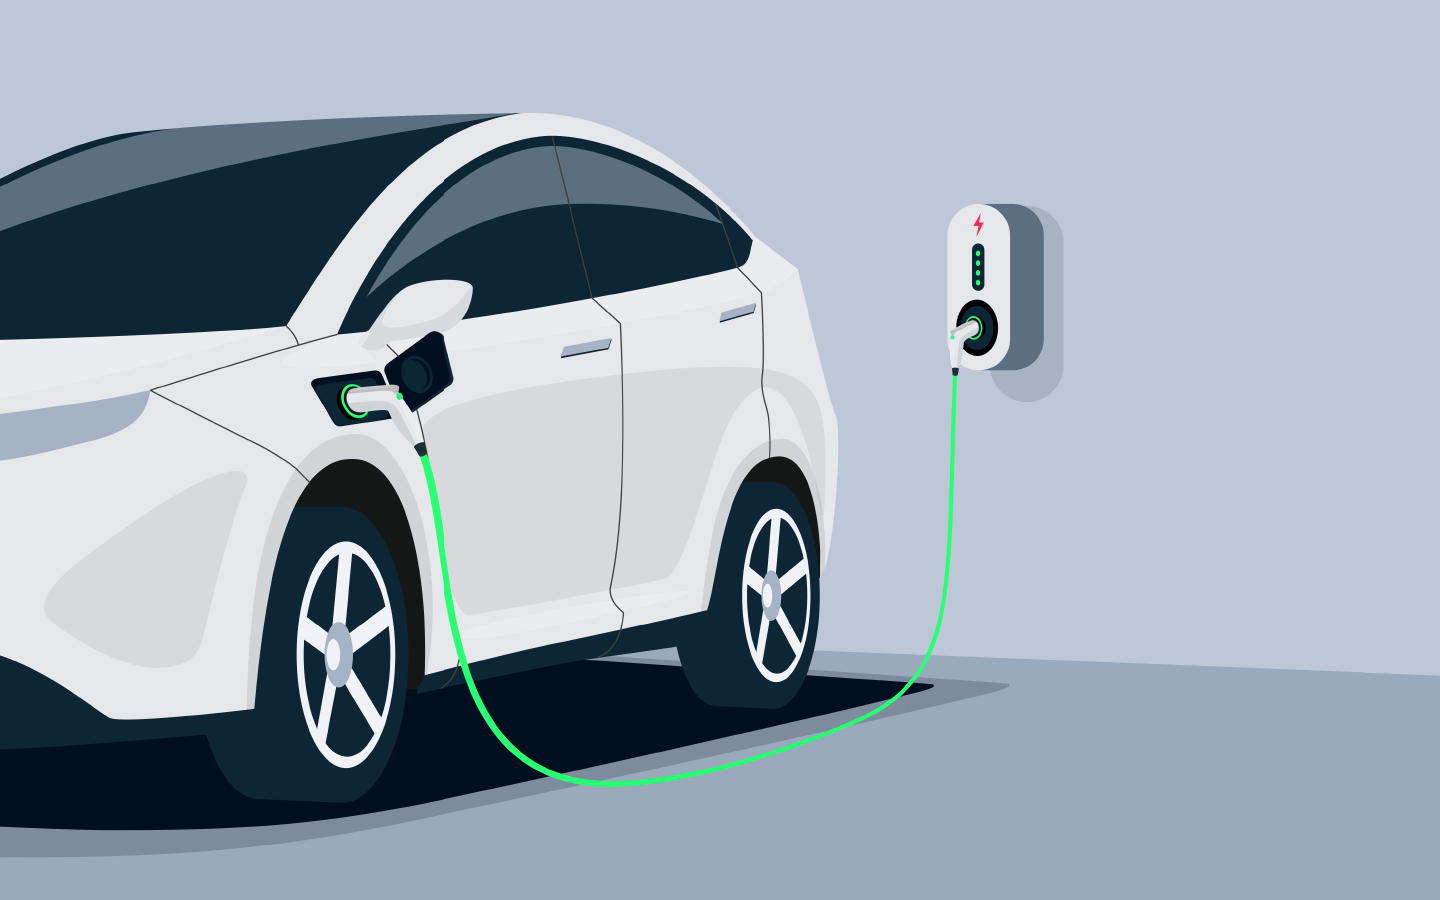 2023 Global Driver Survey reveals increasing demand for accurate parking and charging data and in-car connected services